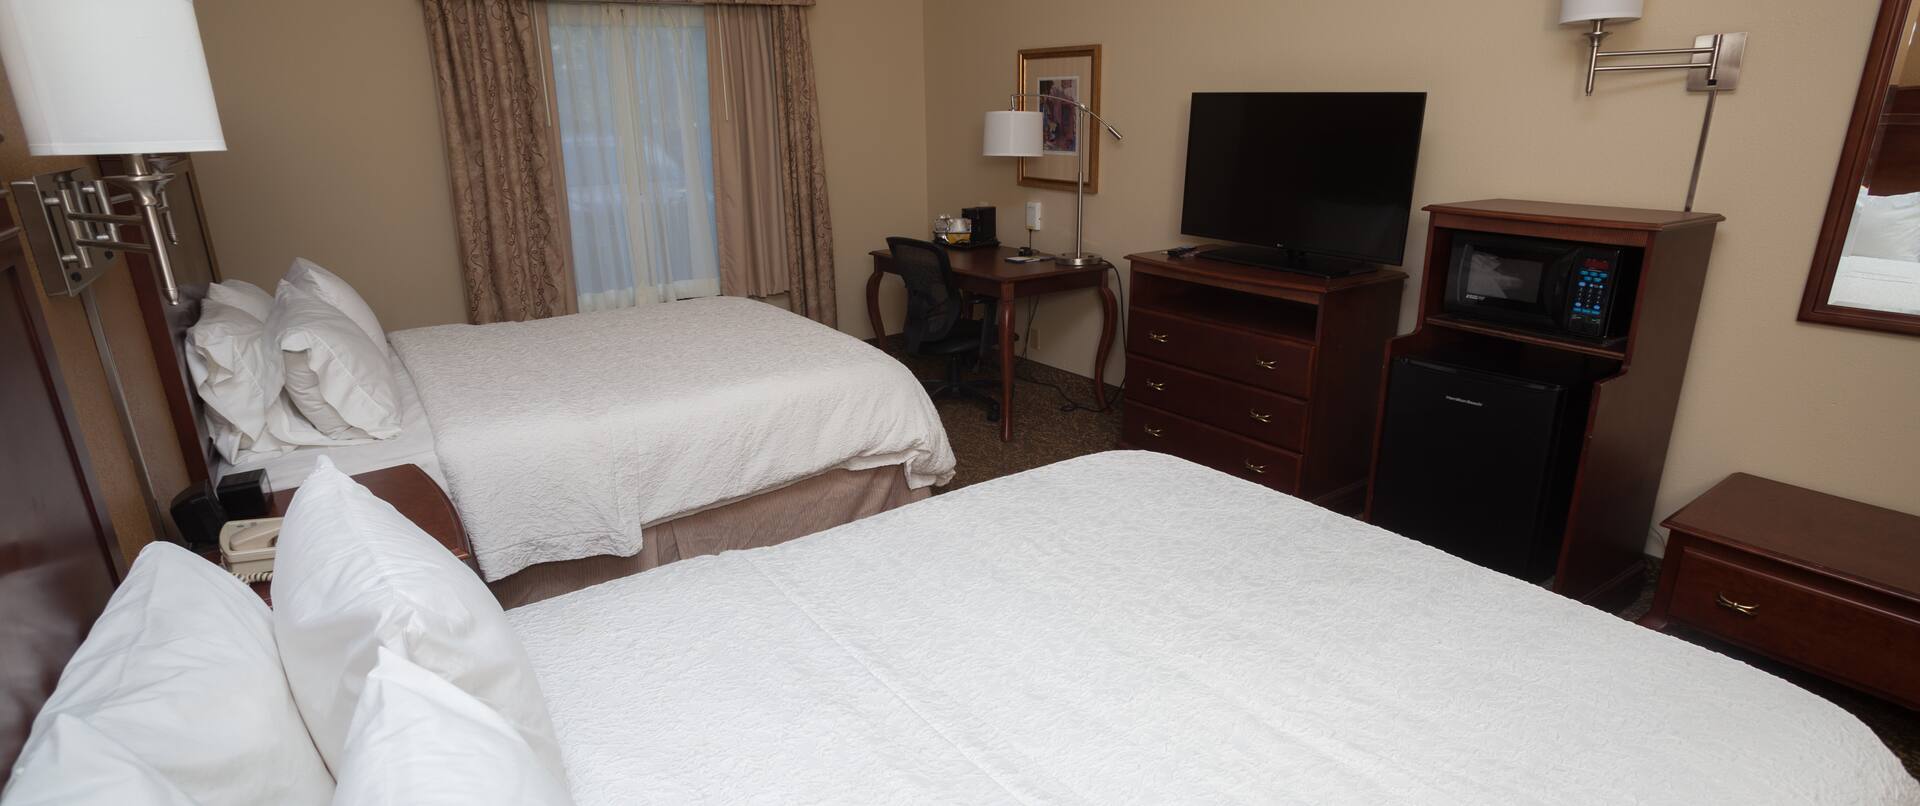 Two Beds HDTV Desk and Microwave in a Hotel Guest Room